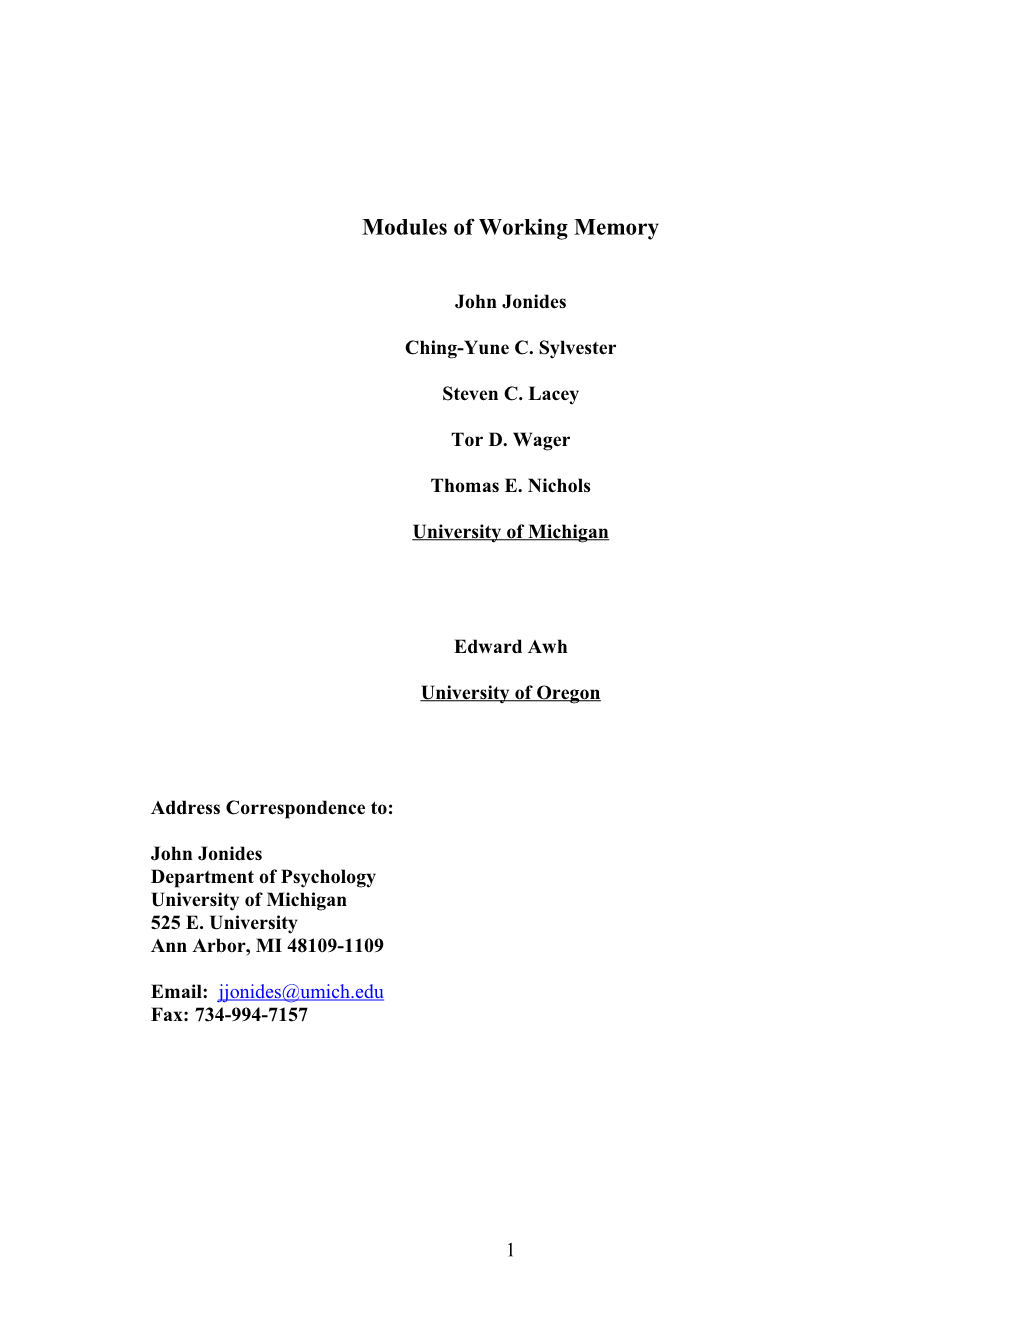 Modules of Working Memory